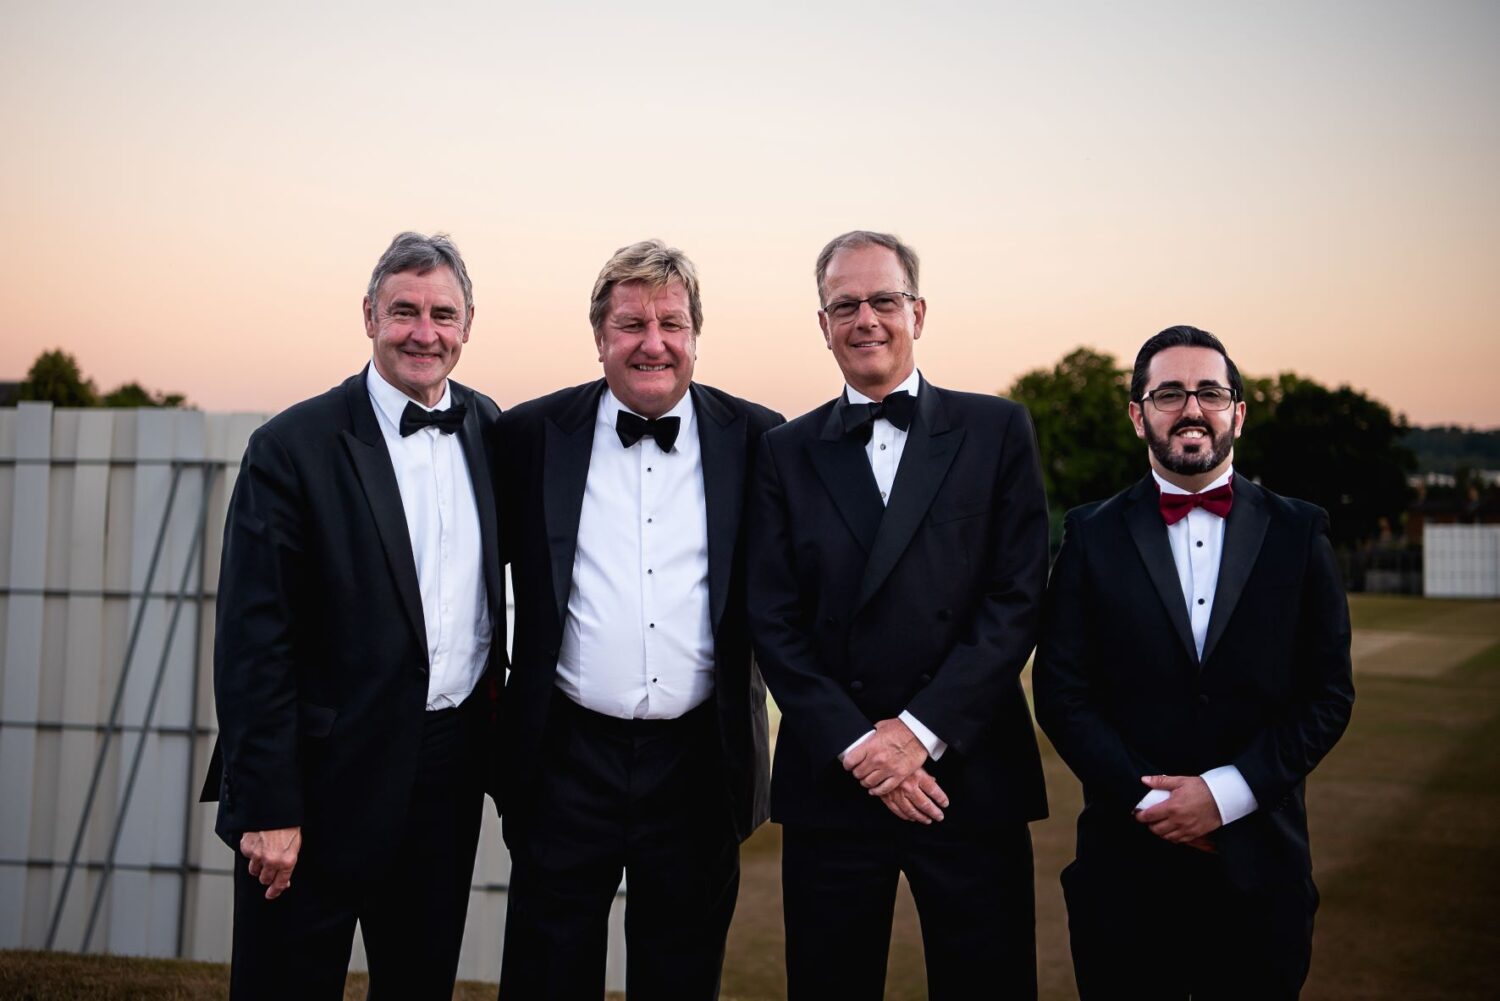 Chris Cowdrey, Simon Lee (President), Gary Withers (Chair) and Nick Farthing (CEO) at Gala Dinner